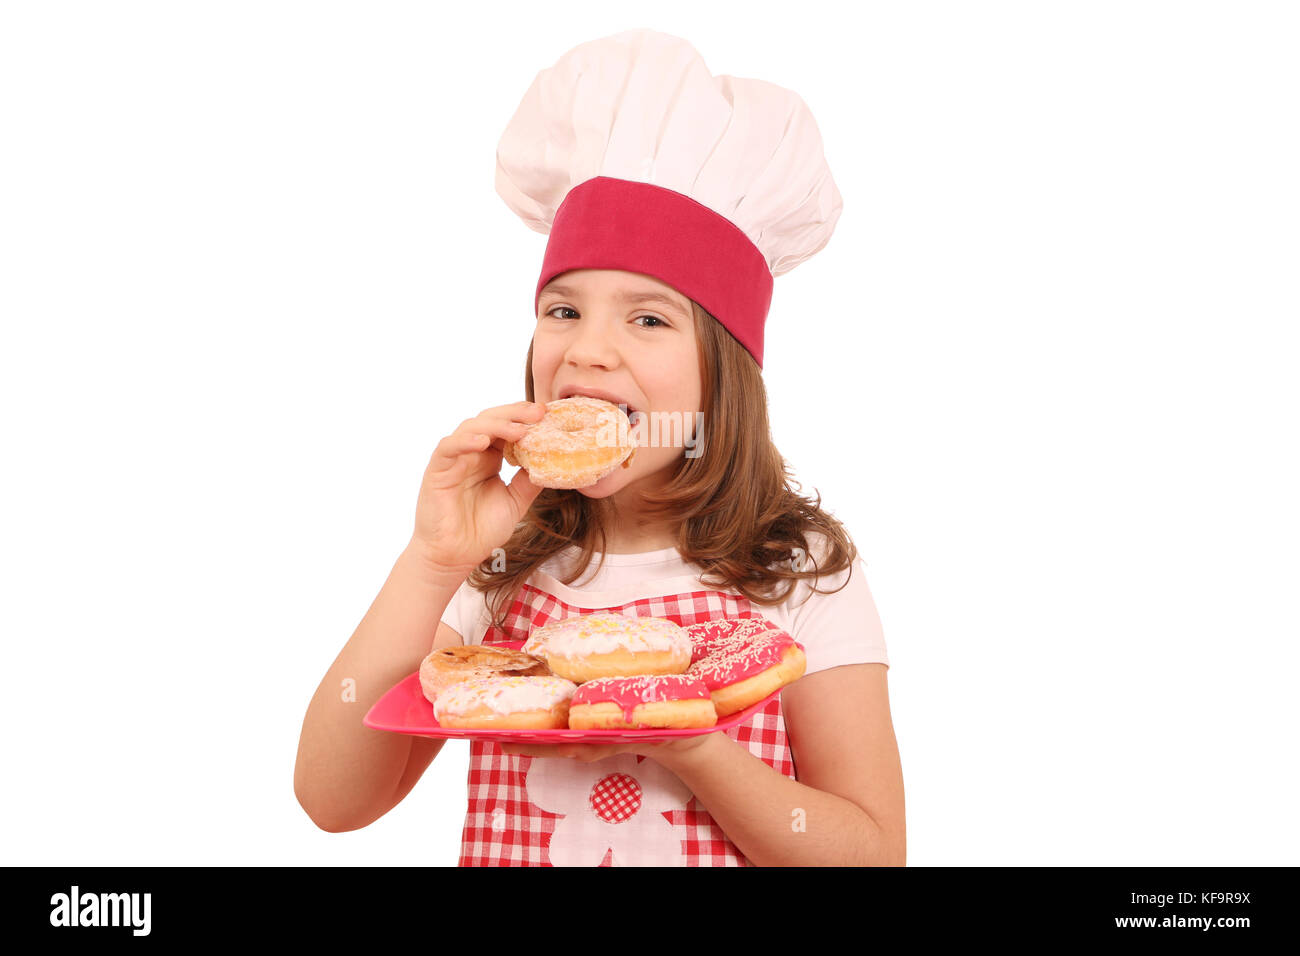 little girl cook eating sweet donuts Stock Photo